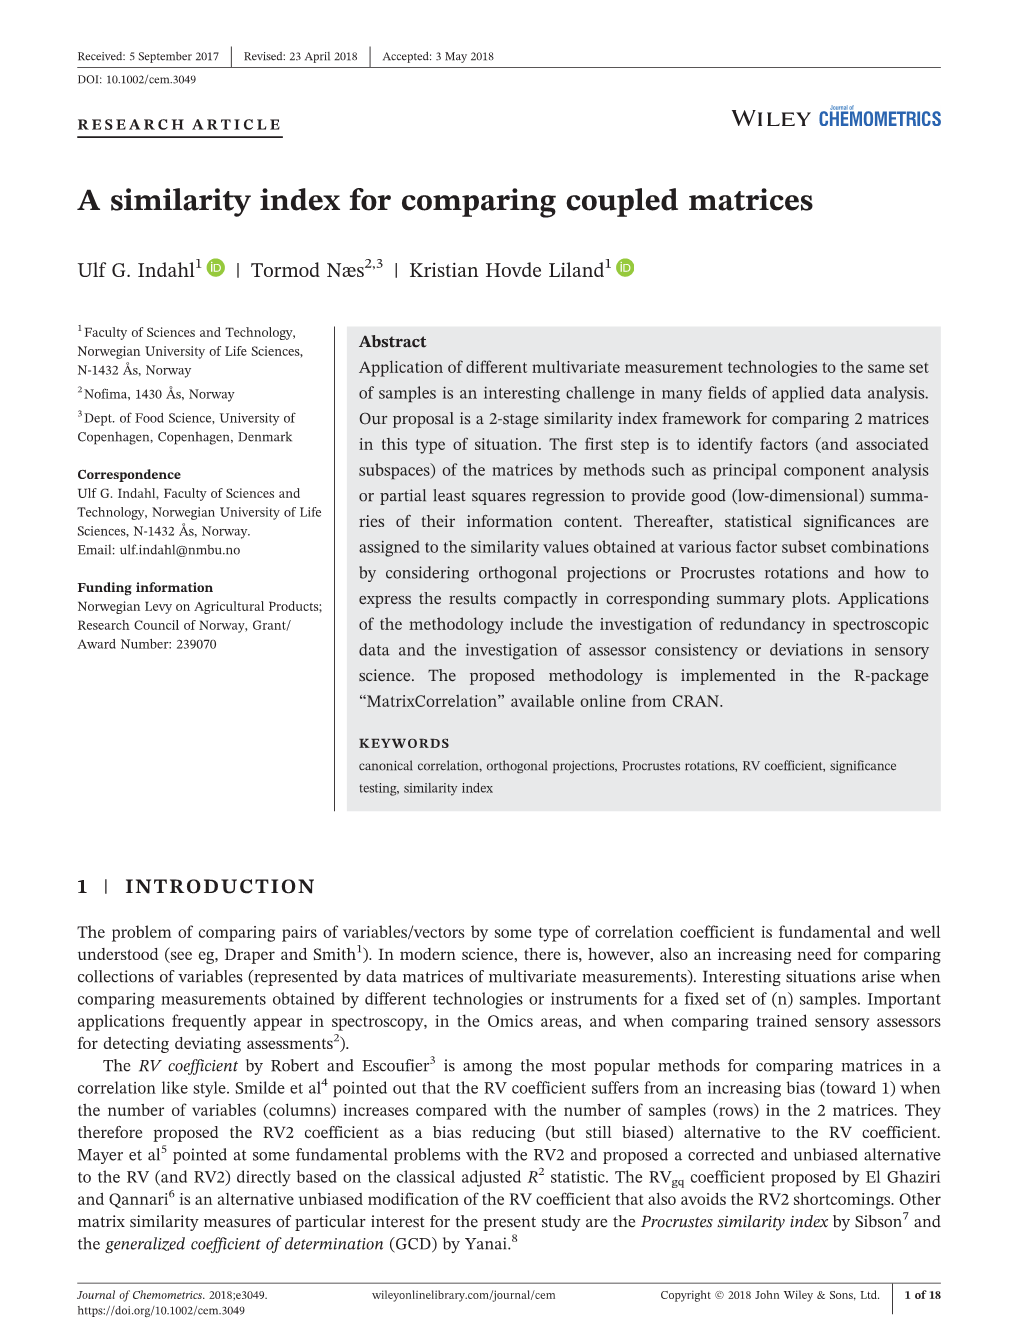 A Similarity Index for Comparing Coupled Matrices